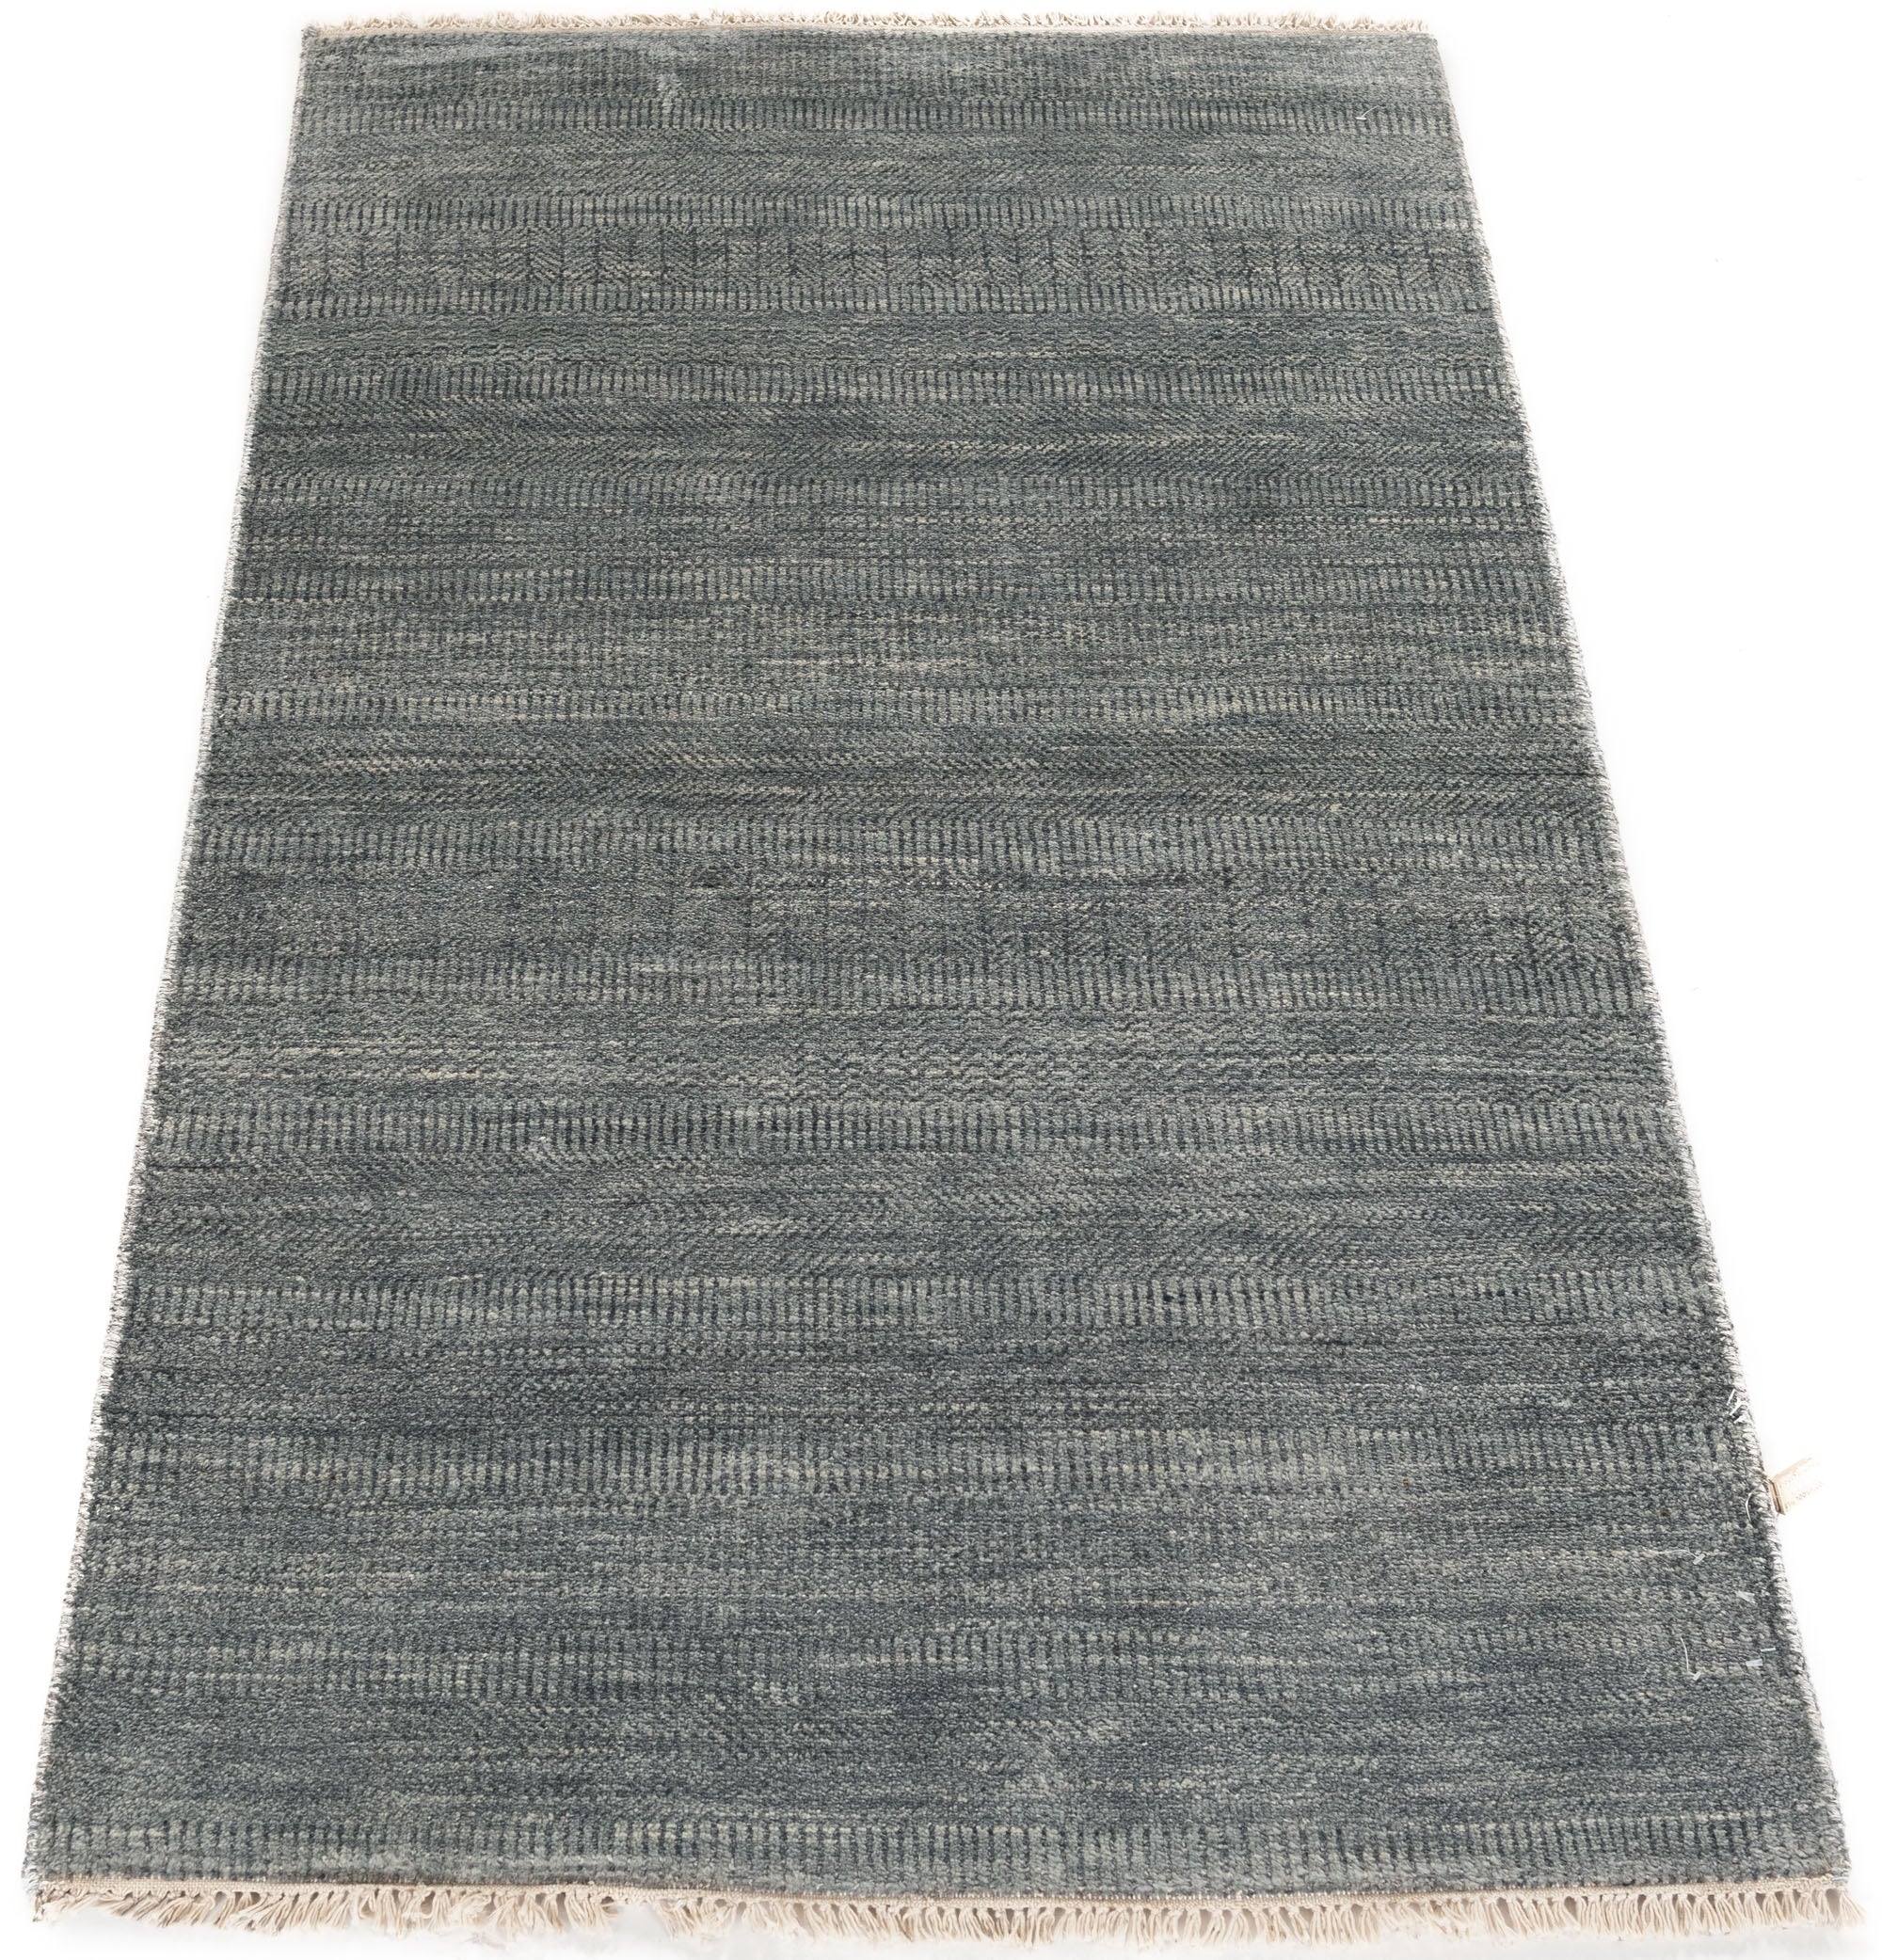 New Blue and Ivory Wool Hand-knotted Area Rug <br> 3'0 x 5'6